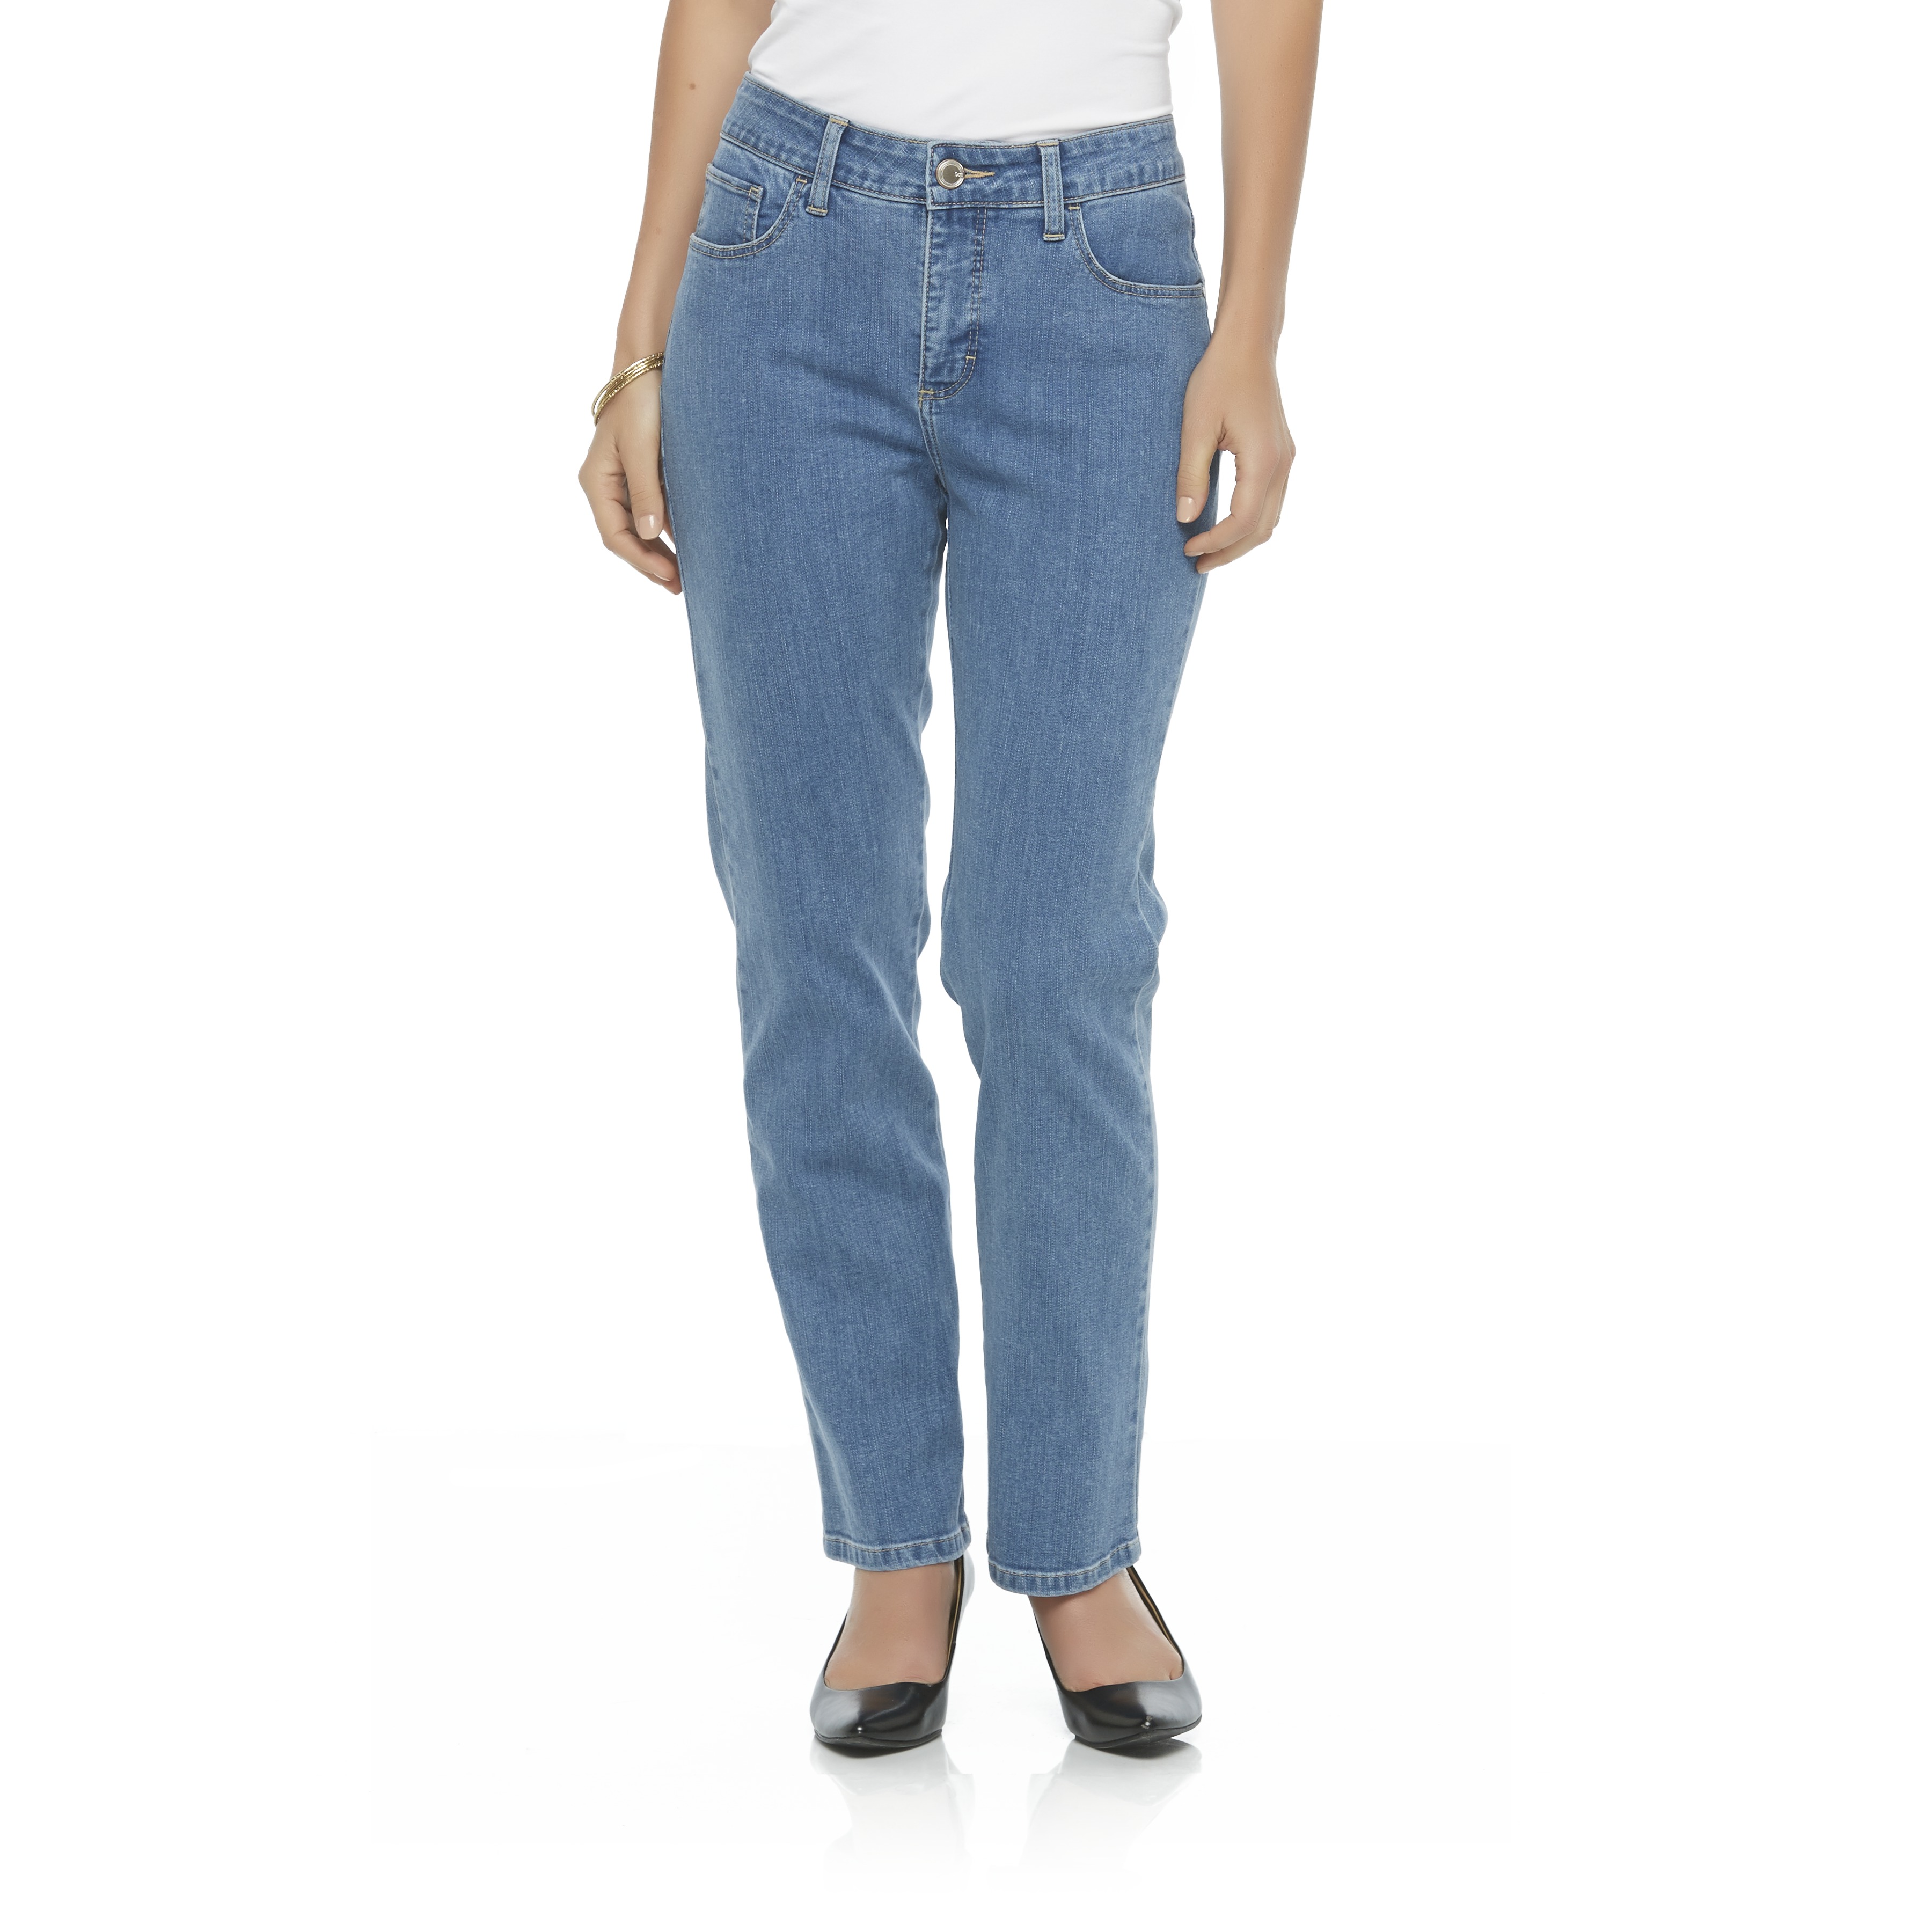 LEE Women's Classic Fit Jeans | Shop Your Way: Online Shopping & Earn ...